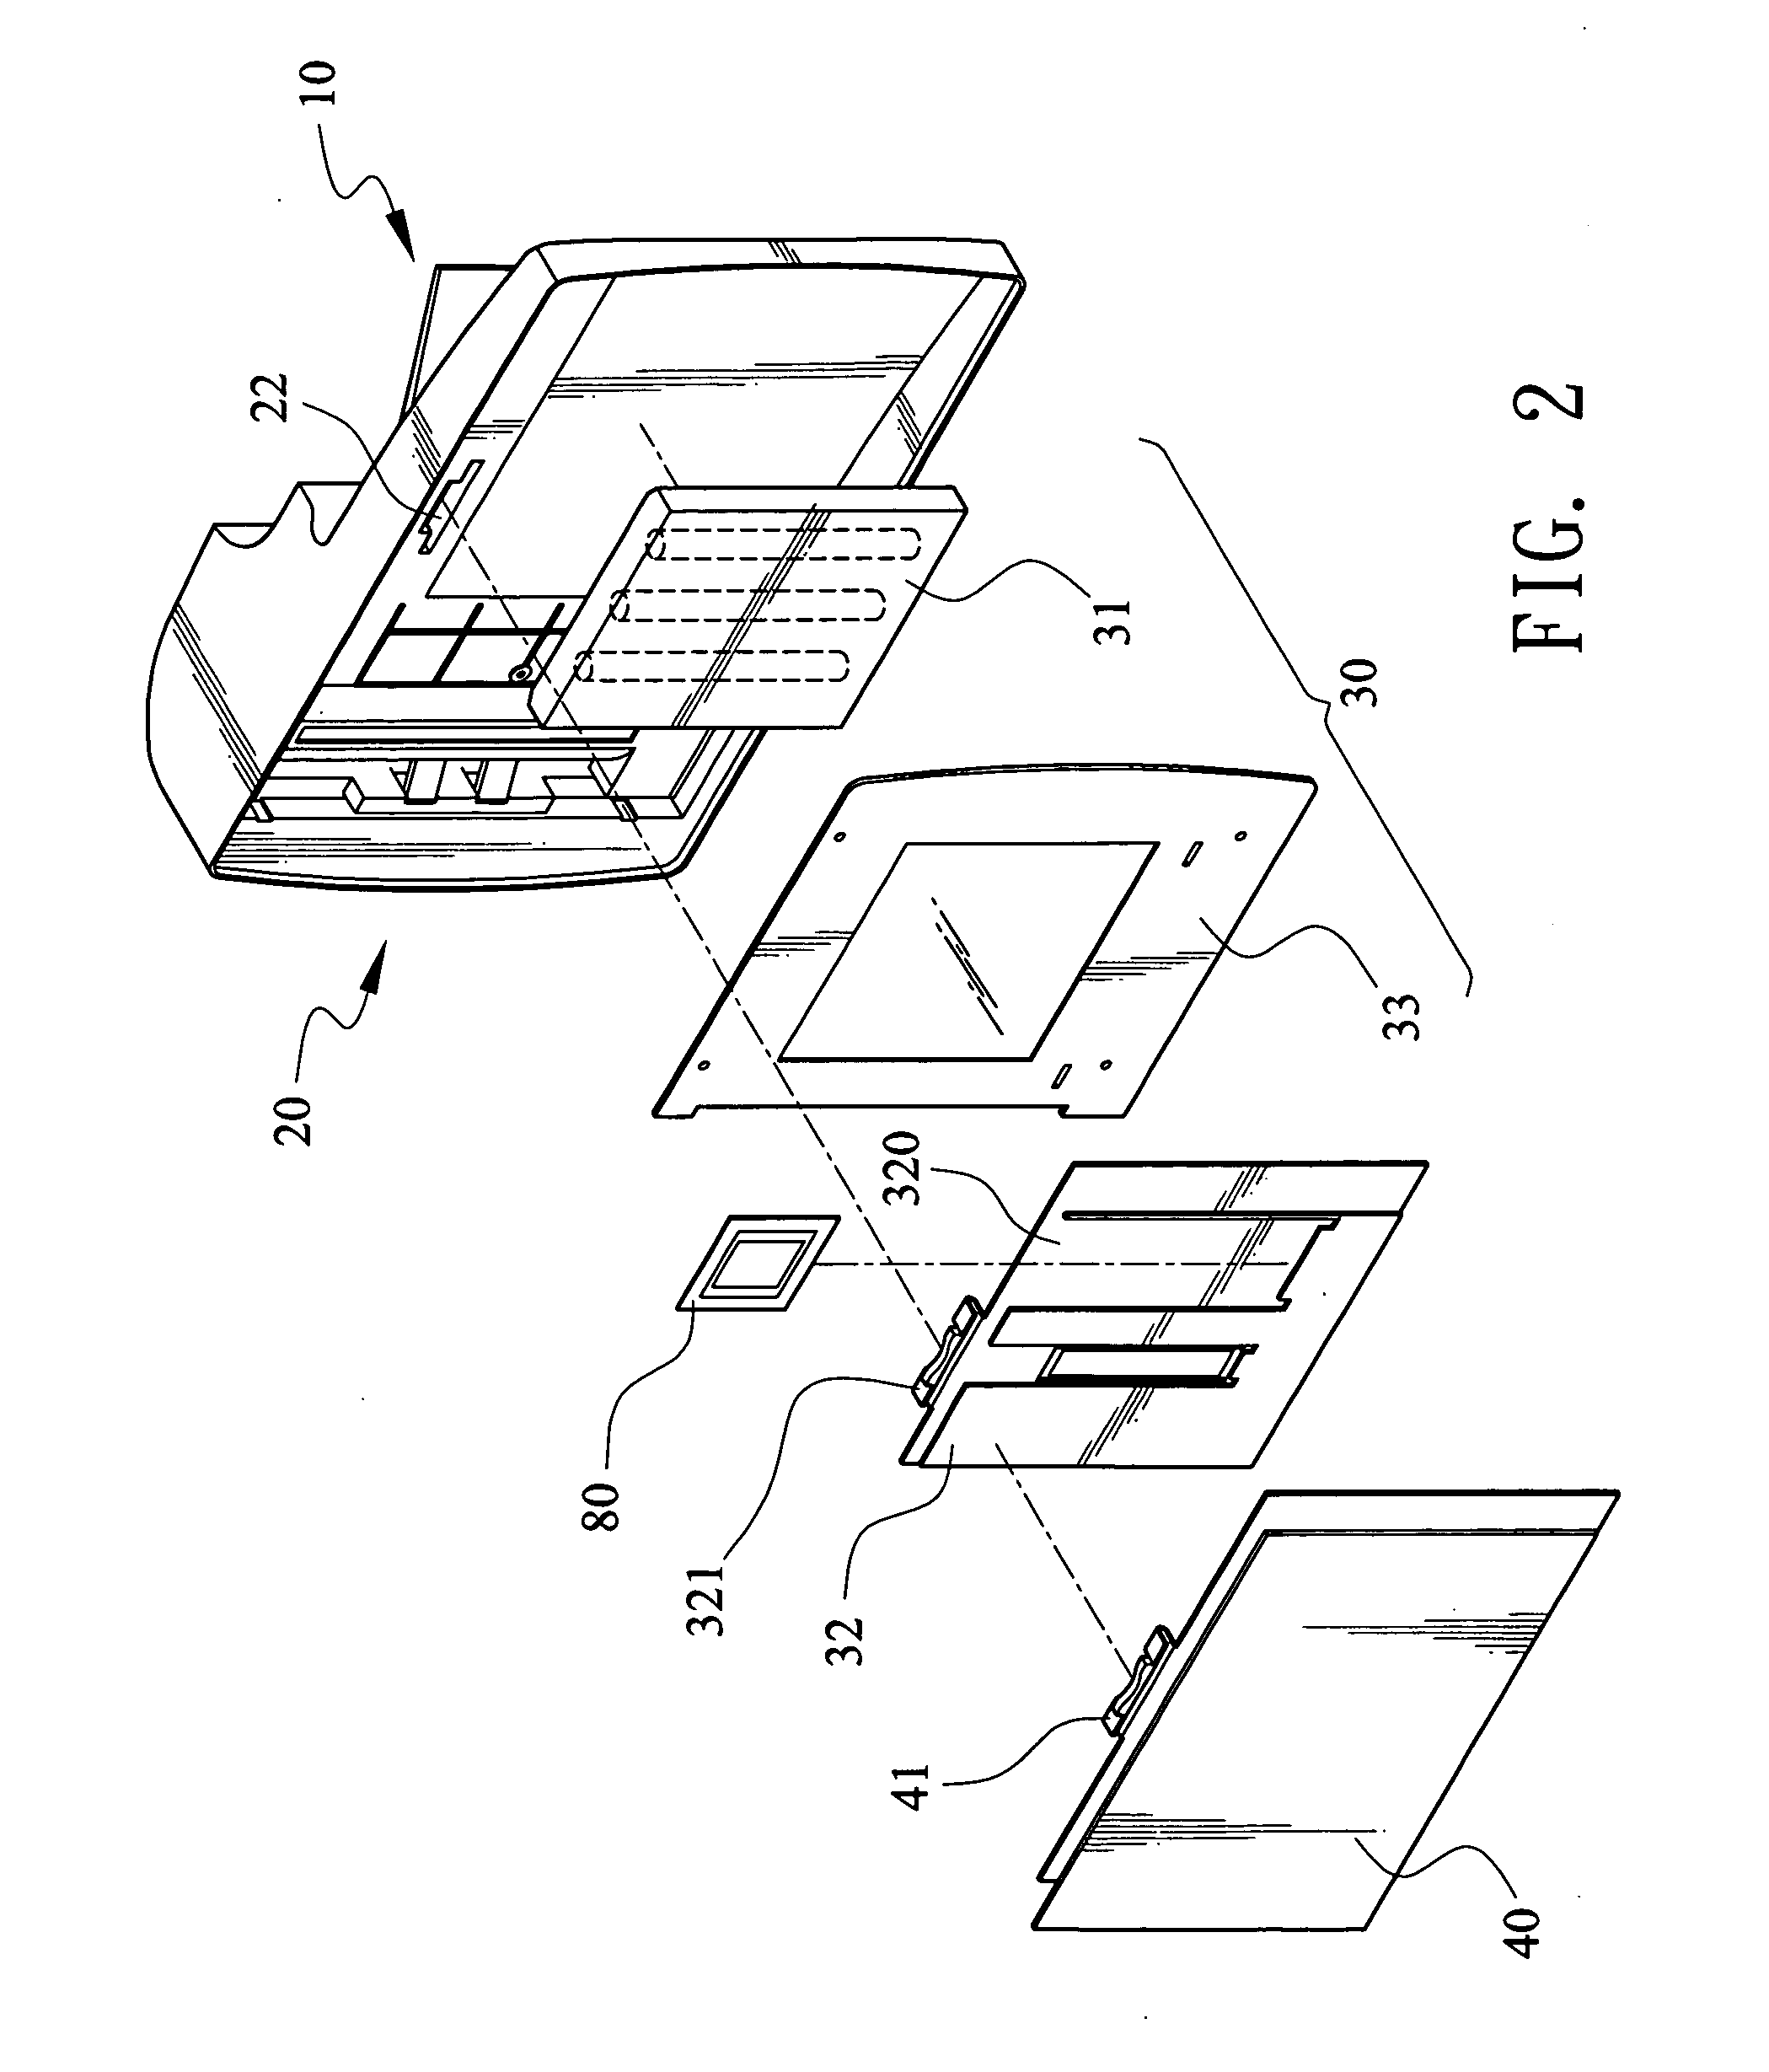 Media feeding device with scanning and fixing functions for transparent documents